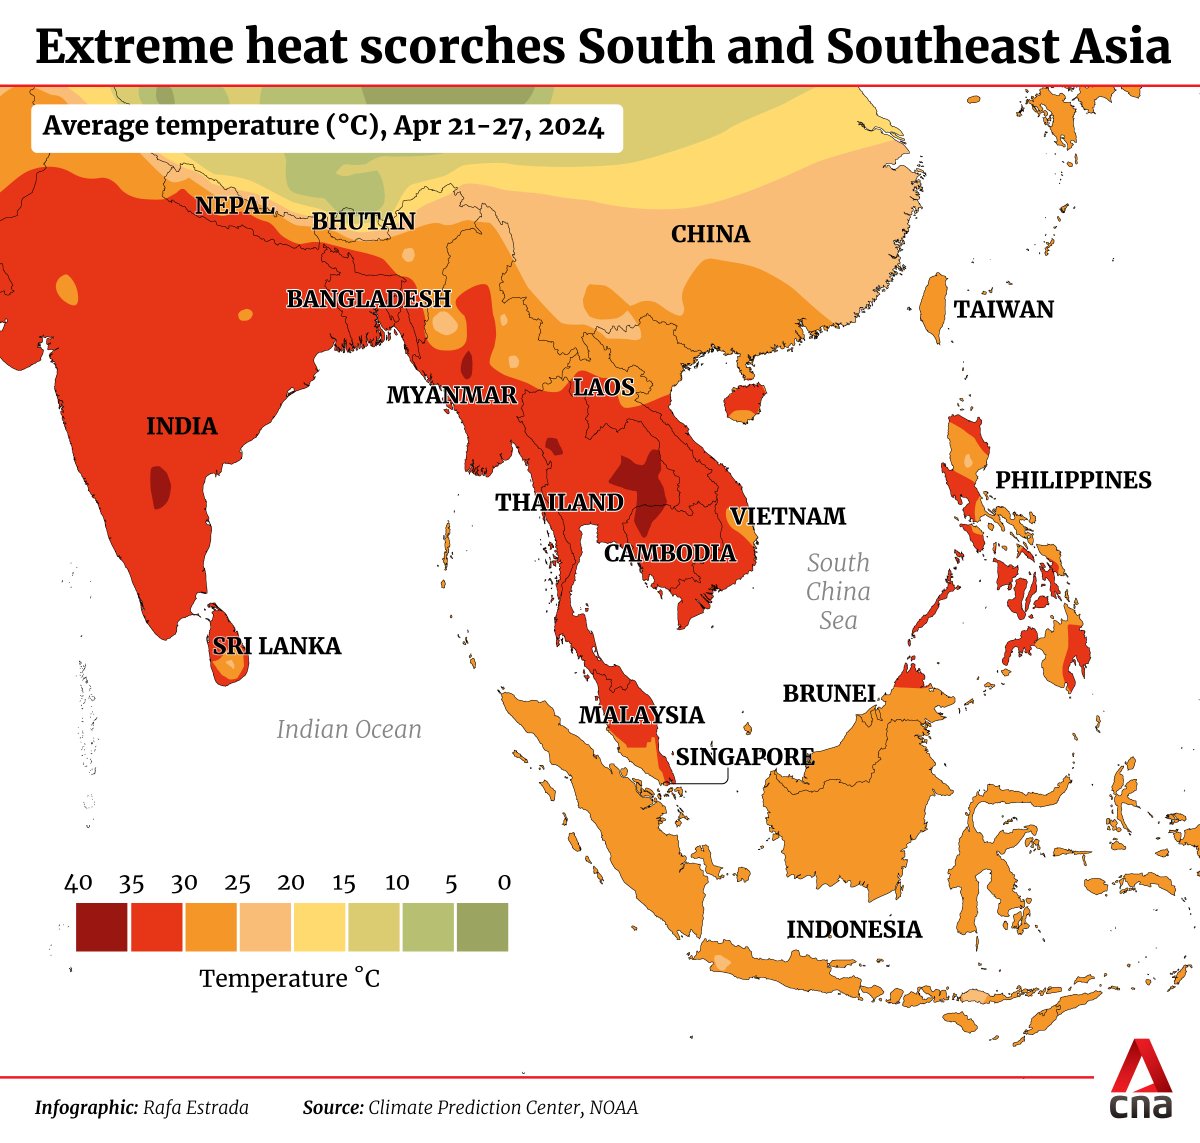 AT A GLANCE: A blistering heatwave continues to roil South and Southeast Asia. The brutal temperatures are also being blamed for the deaths of hundreds of thousands of fish in Vietnam cna.asia/3QlDyBh